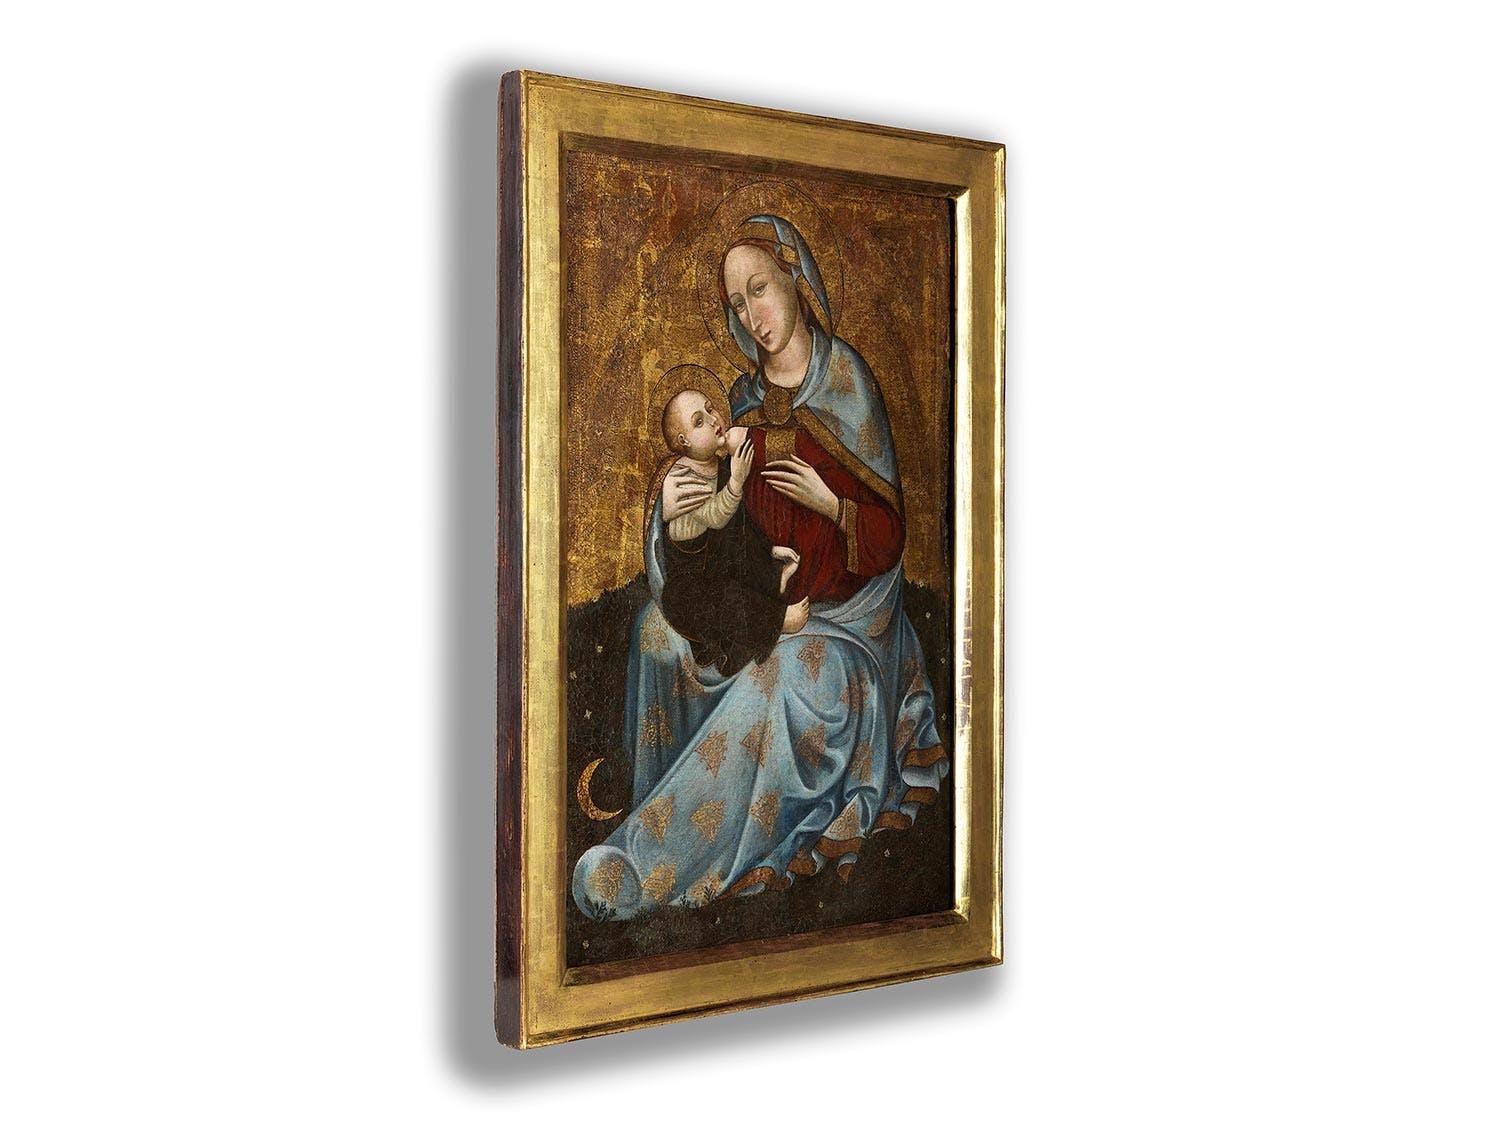 Artwork by Old Masters School, 15th Century, MARIA LACTANS, Made of tempera on wood